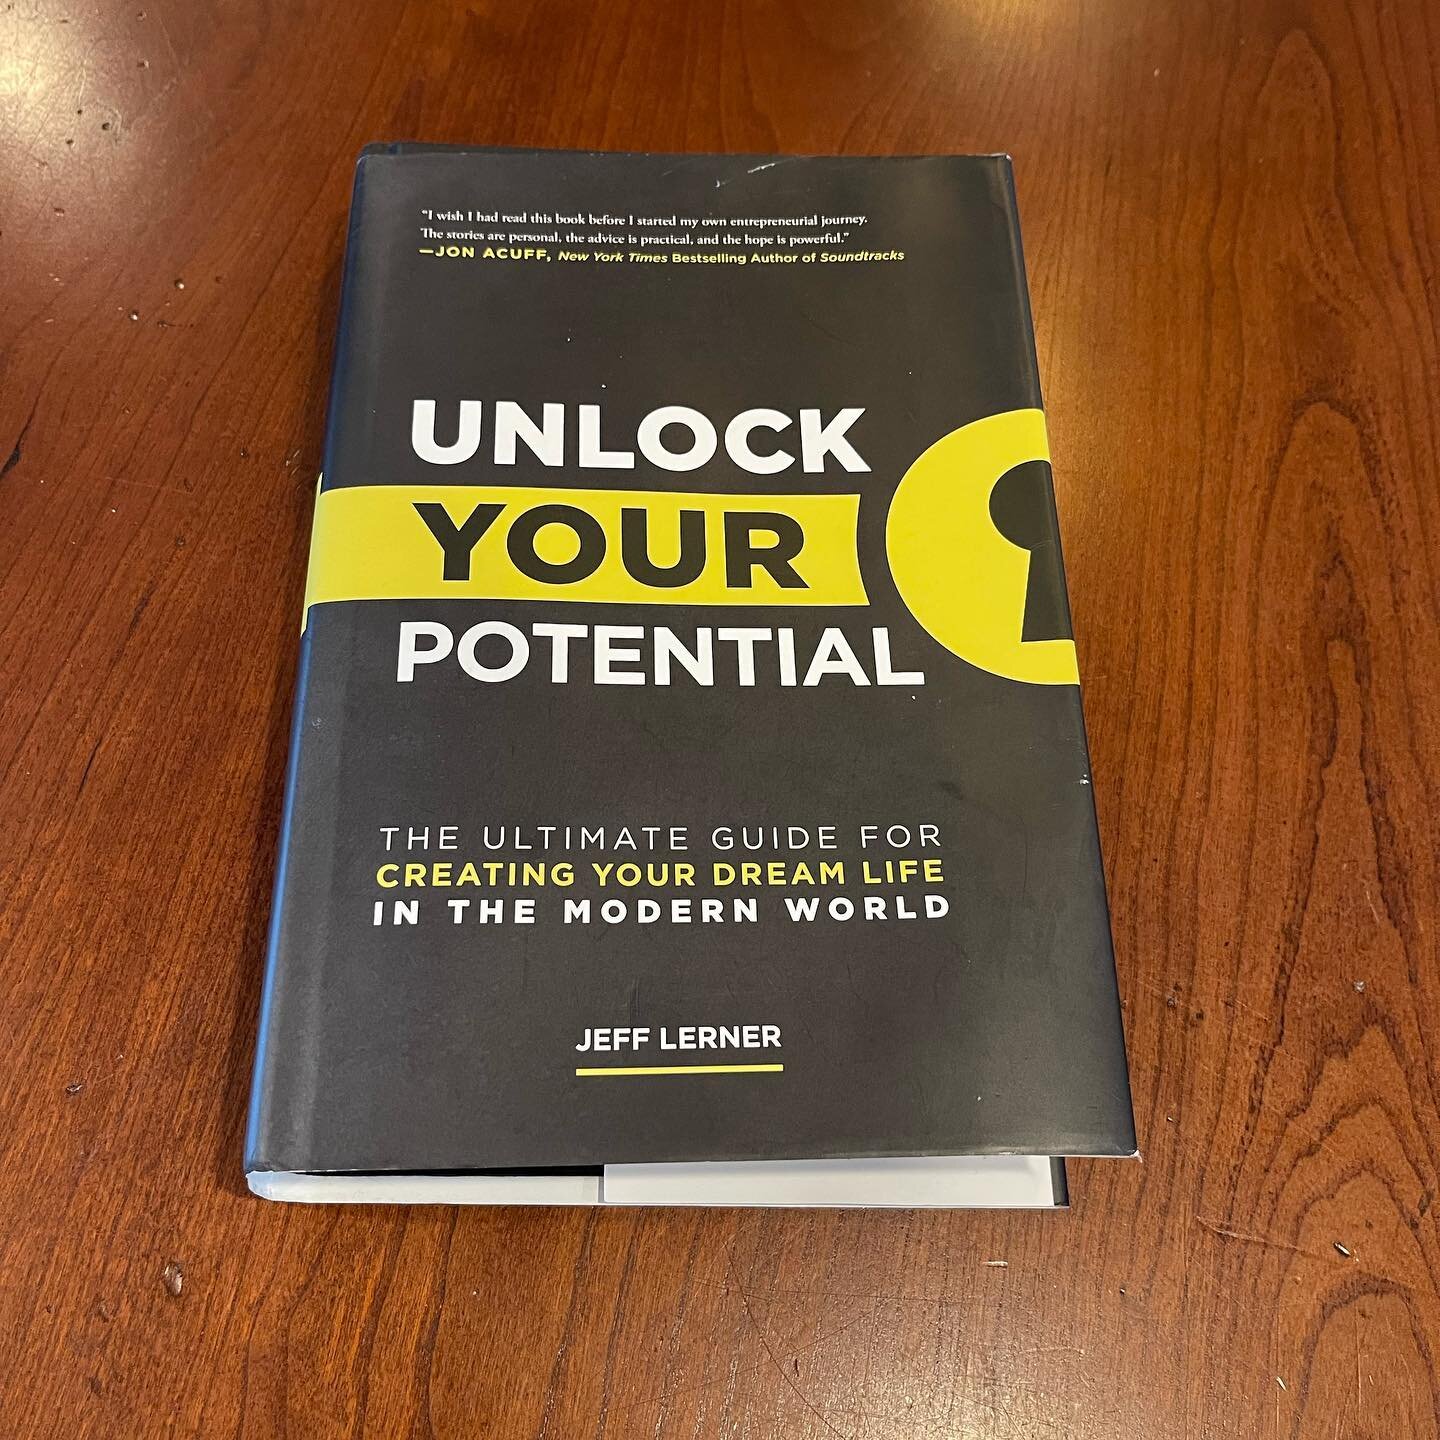 Recommend for anyone who wants more in life. @jefflernerofficial brilliantly delivers a comprehensive guide for creating the life you desire. Good for any stage of life. #unlockyourpotential